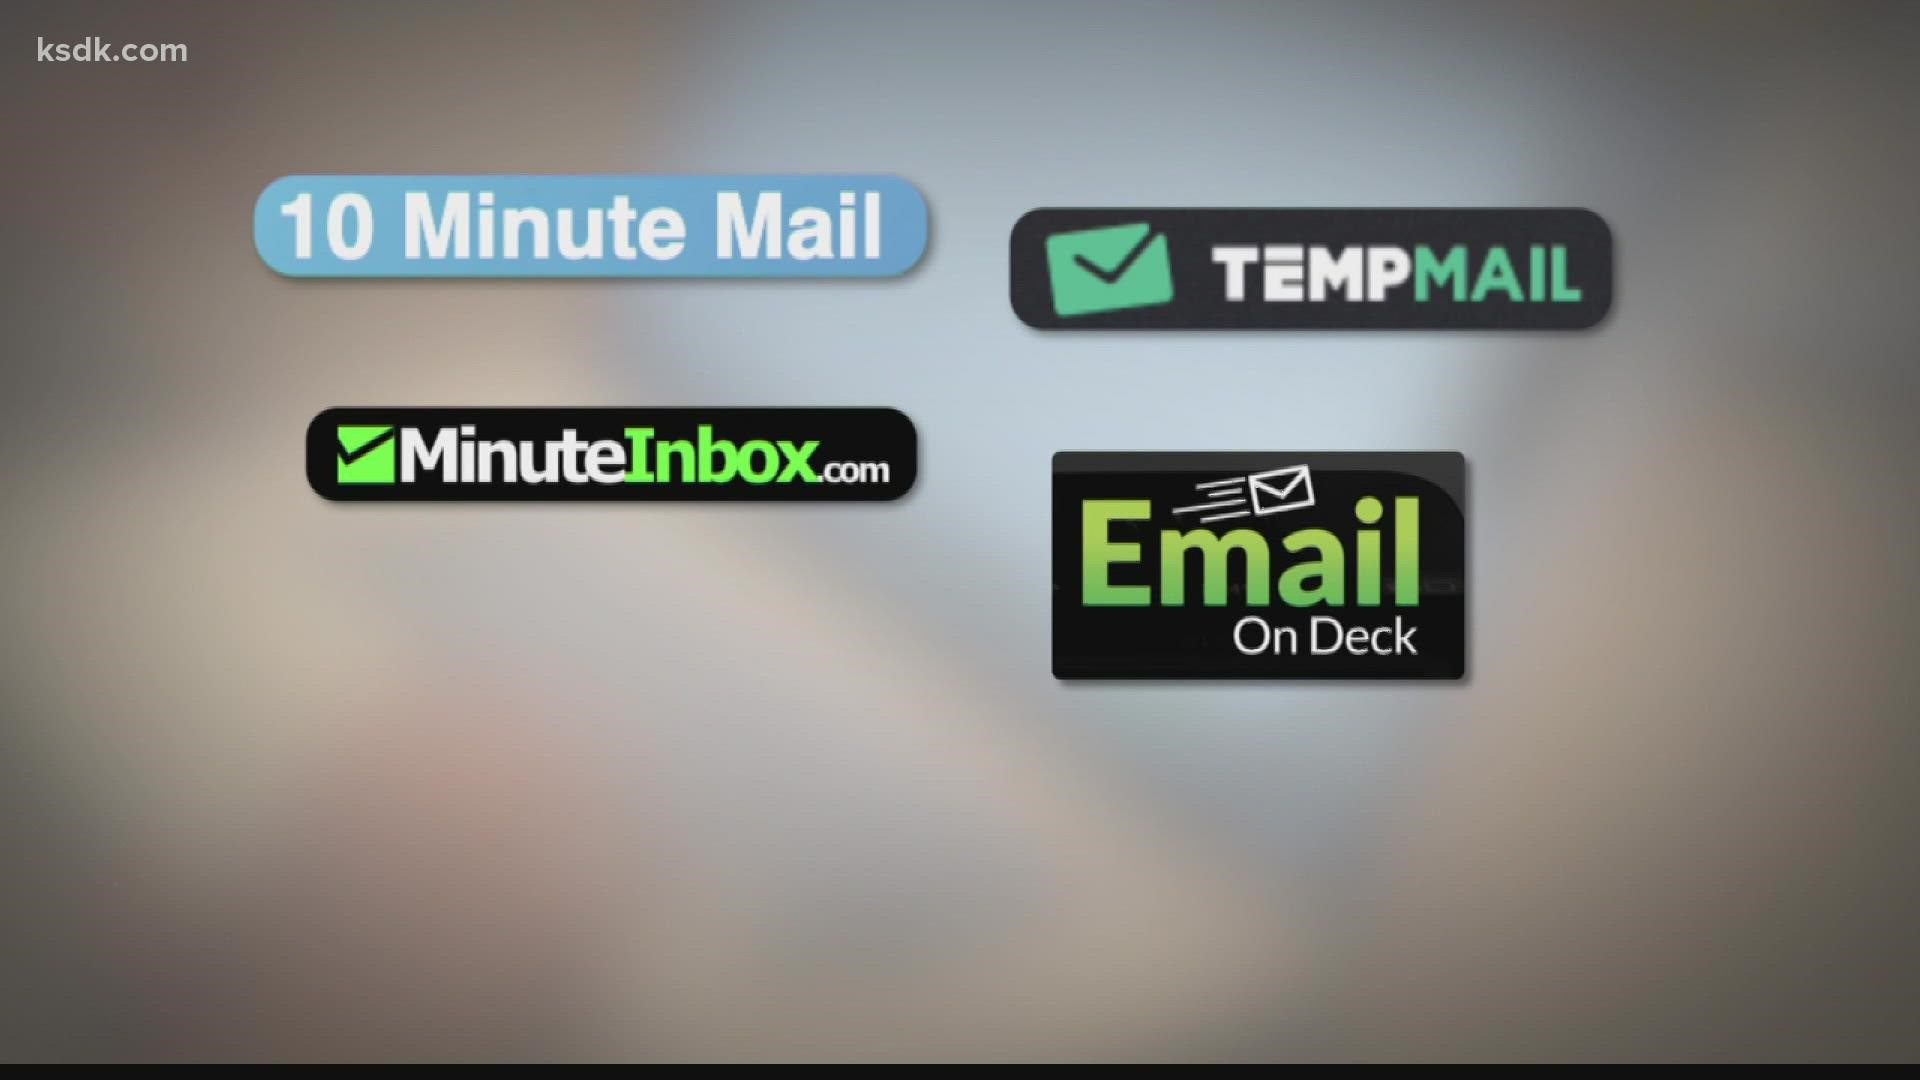 As Consumer Reports explains, an alternative or fake email address is an easy way to keep companies from tracking you.